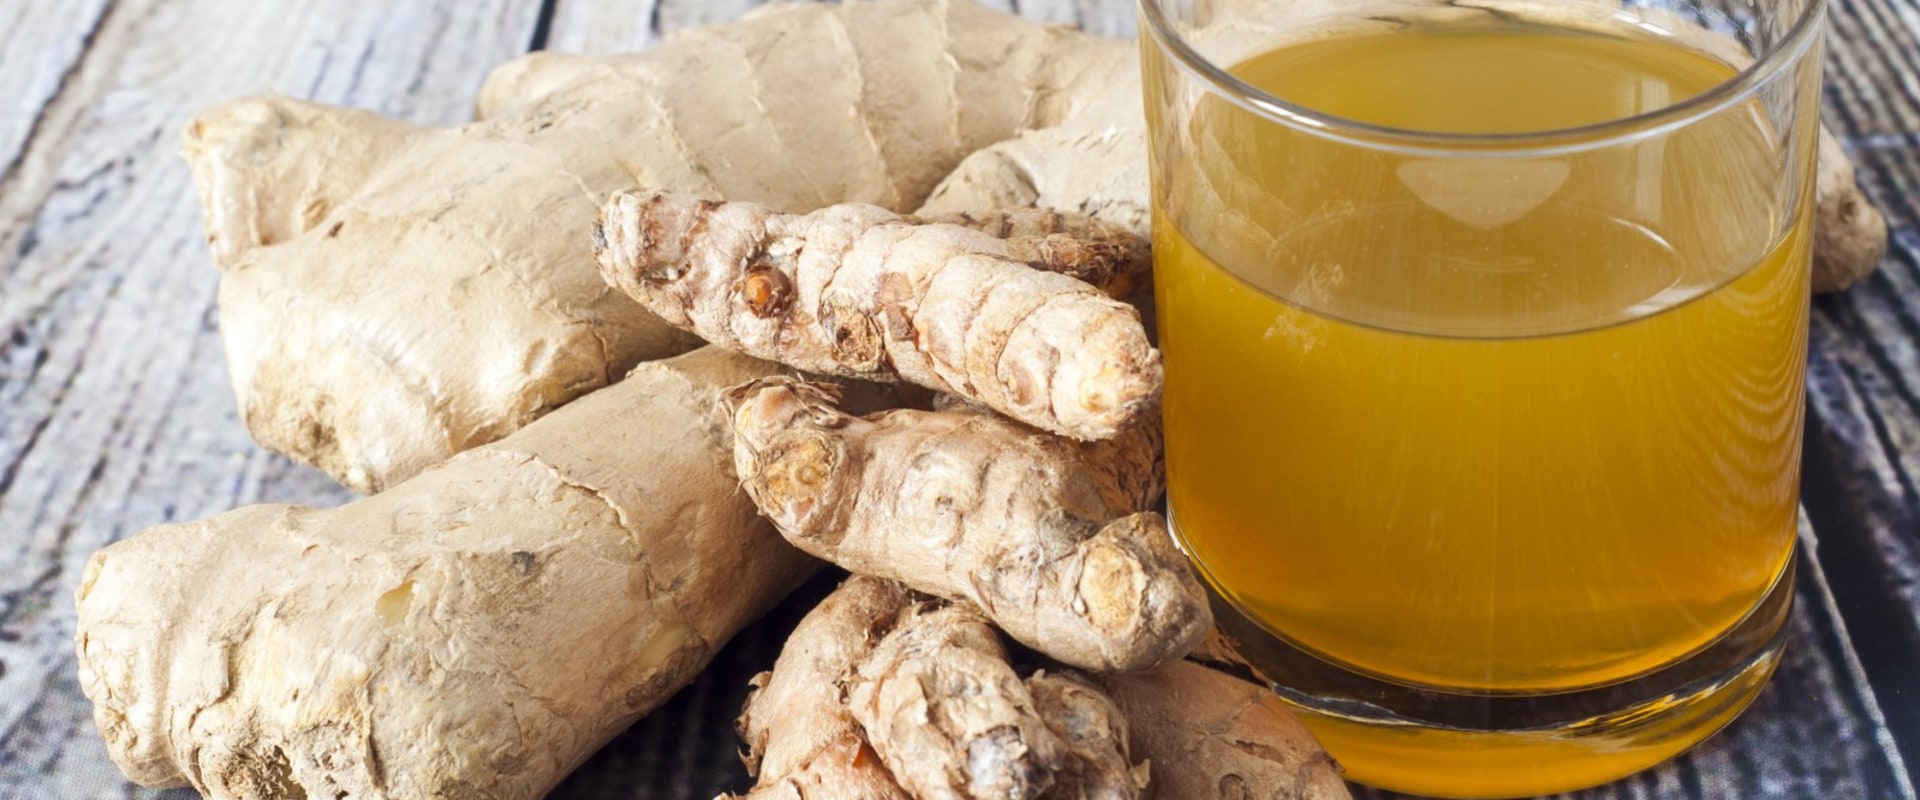 What are the Side Effects of Consuming Too Much Ginger?